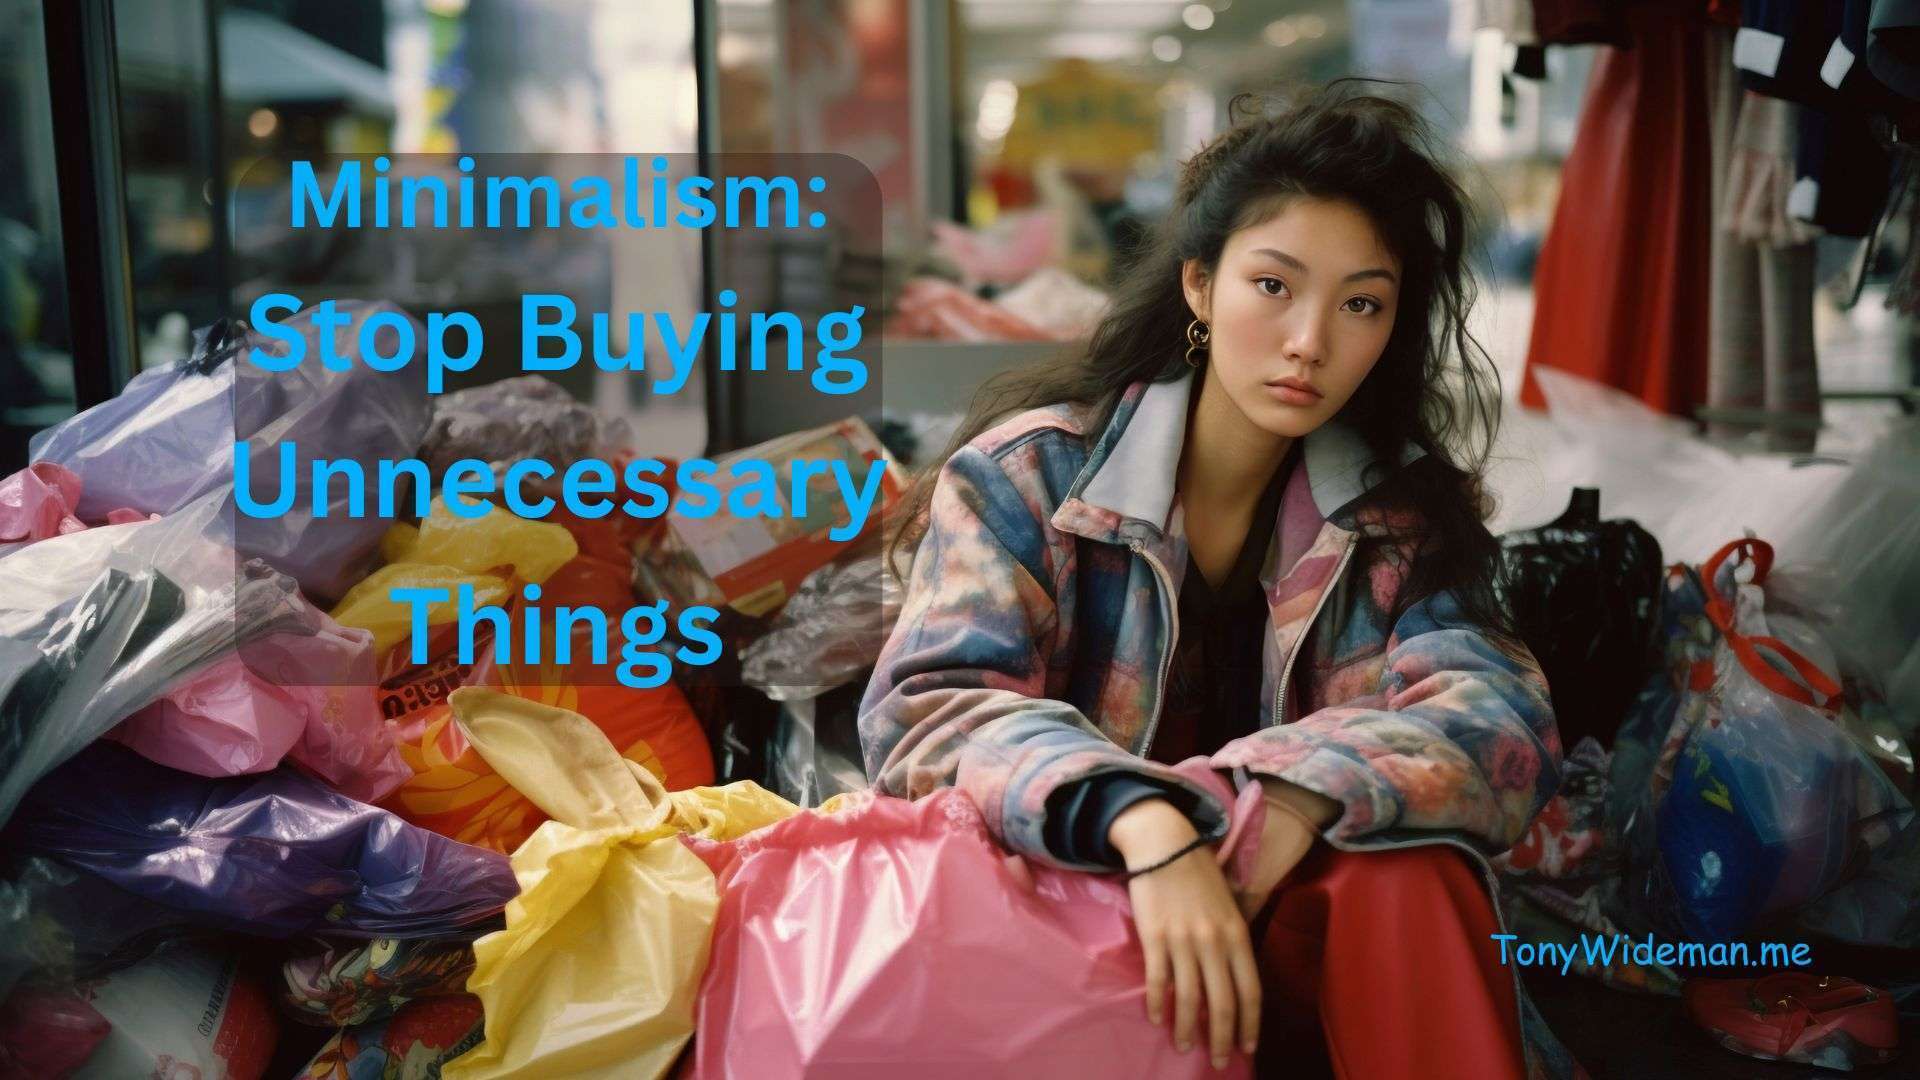 Minimalism: Stop Buying Unnecessary Things